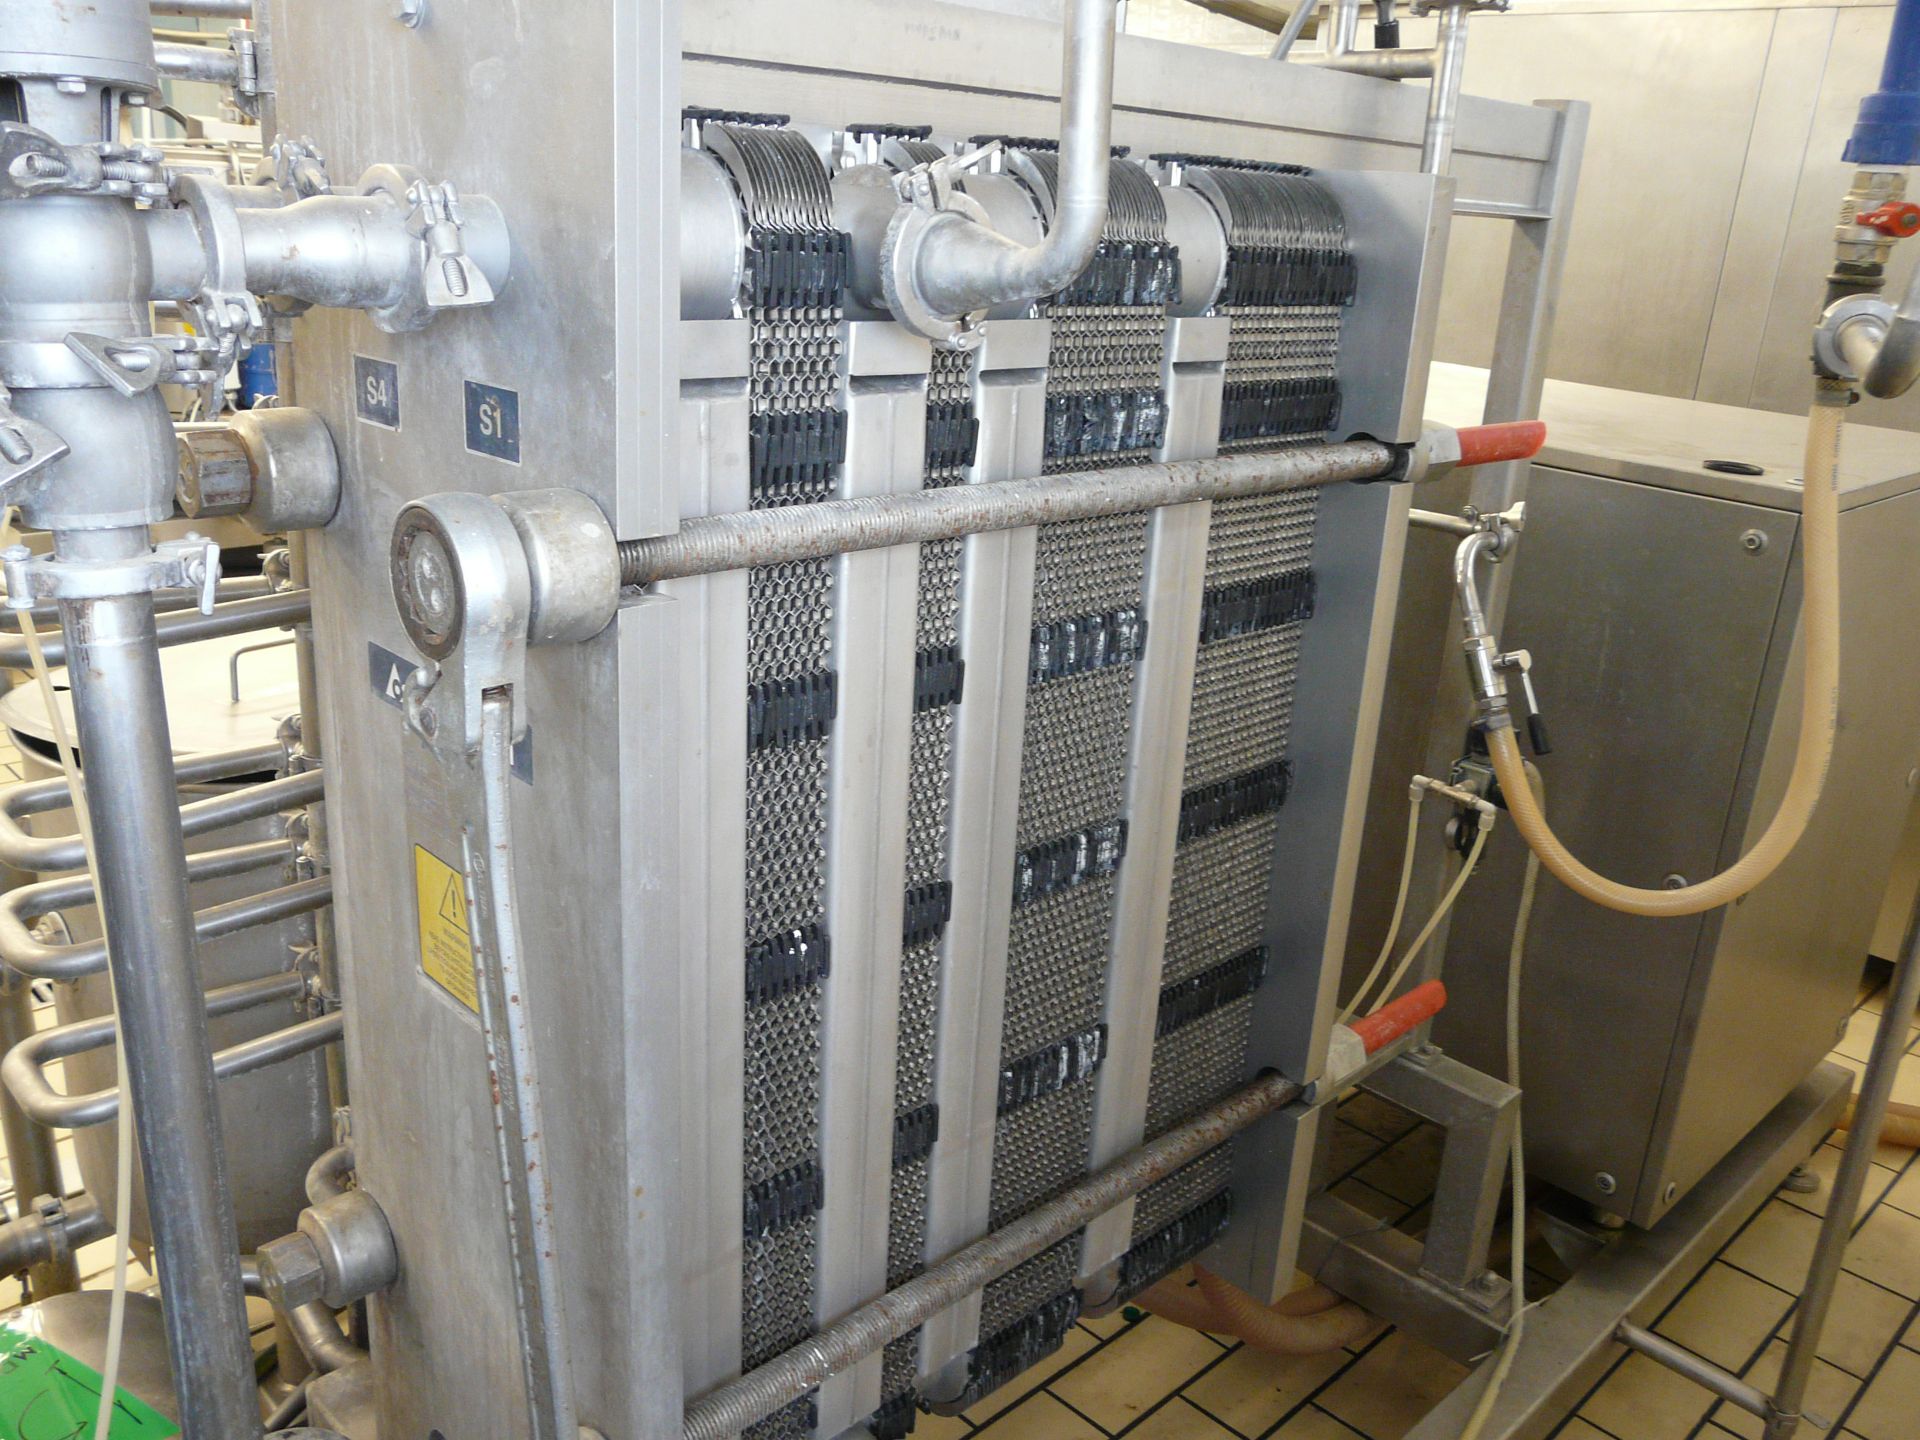 TETRA PAK HOYER HTST 1200 Pasteurizer for Ice Cream , Contains 2 x Tanks with agitators ,1 Plate - Image 8 of 20